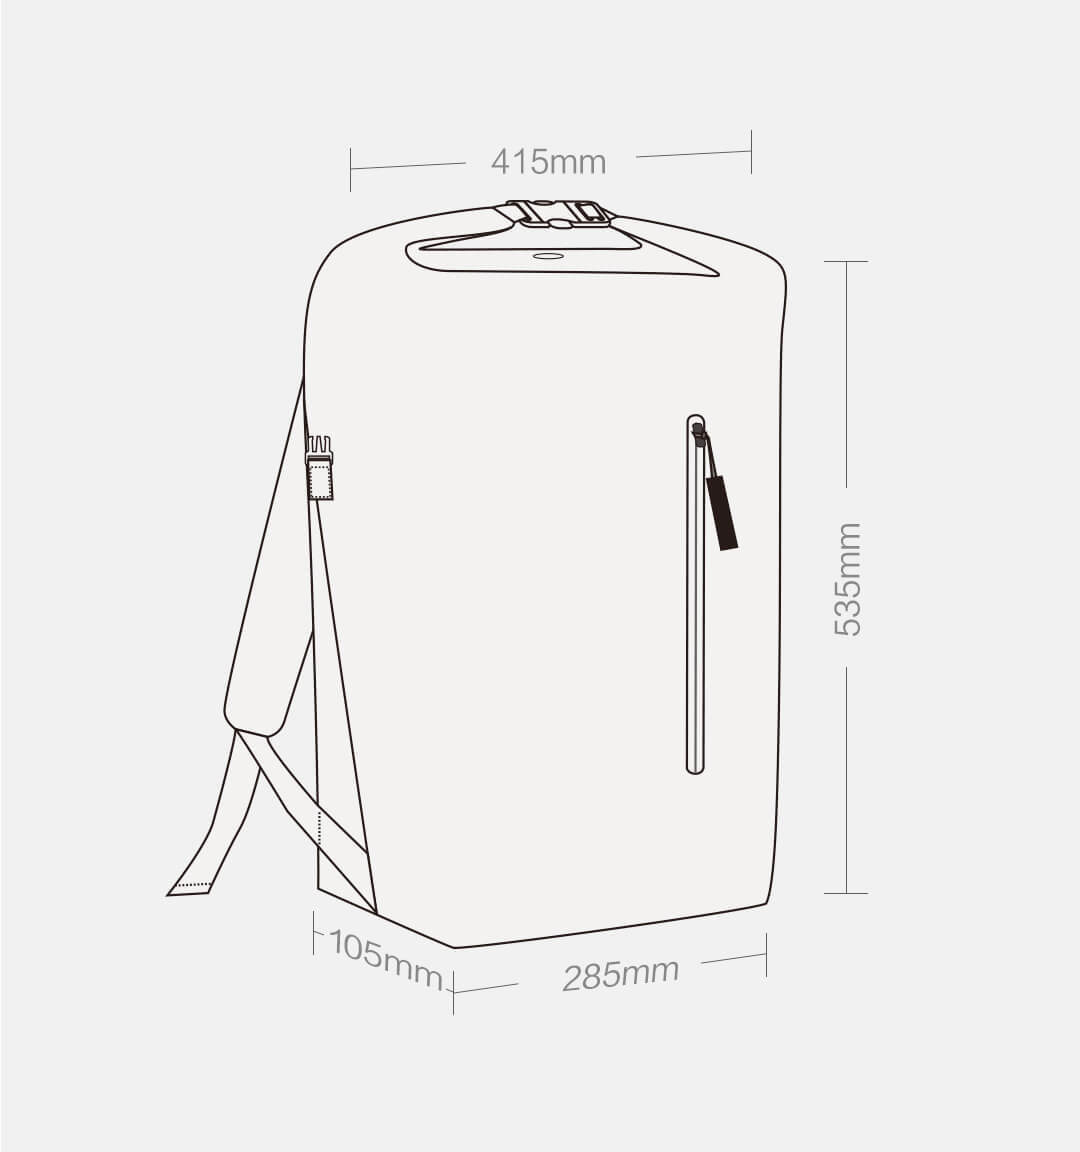 Outdoor-Backpack-Lightweight-Sports-Folding-Bag-Portable-Camping-Hiking-School-Bag-from-XIAOMI-YOUPI-1504212-10